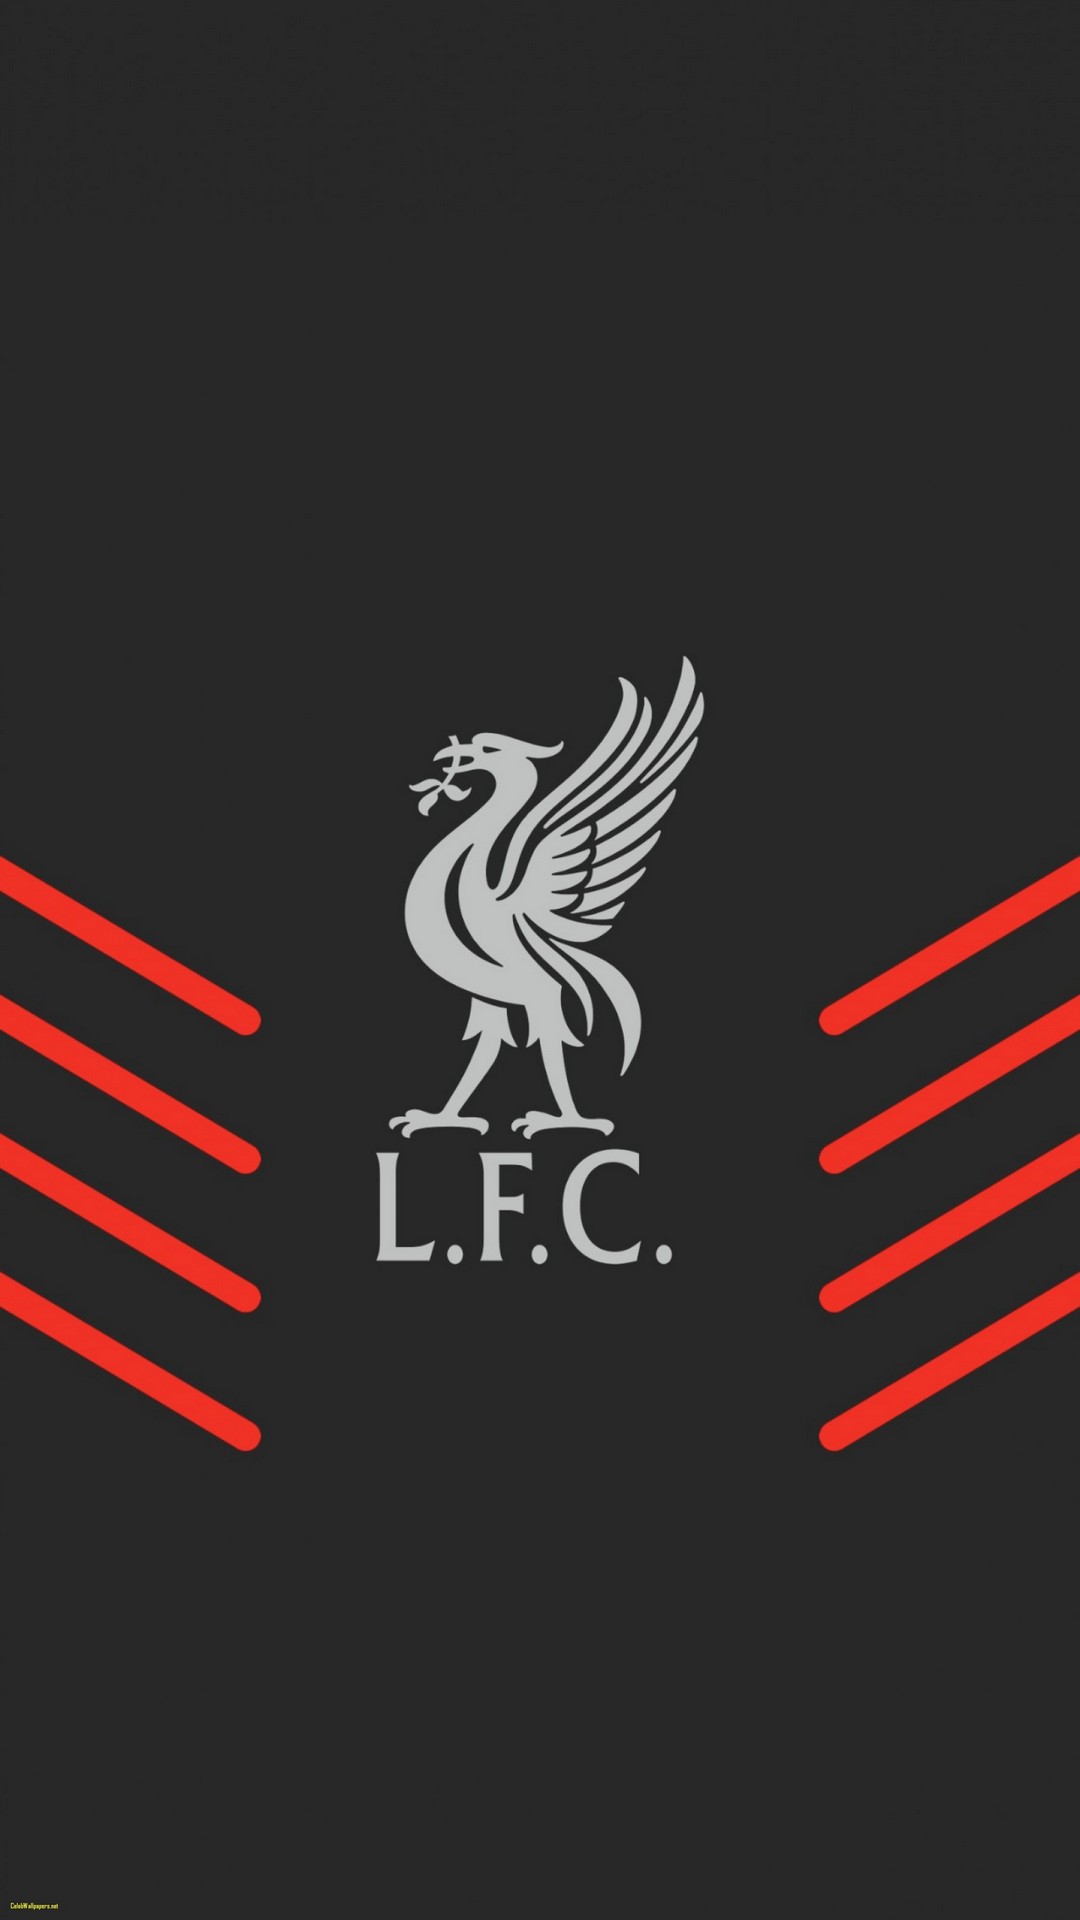 Liverpool iPhone Wallpaper With high-resolution 1080X1920 pixel. You can use this wallpaper for your iPhone 5, 6, 7, 8, X, XS, XR backgrounds, Mobile Screensaver, or iPad Lock Screen